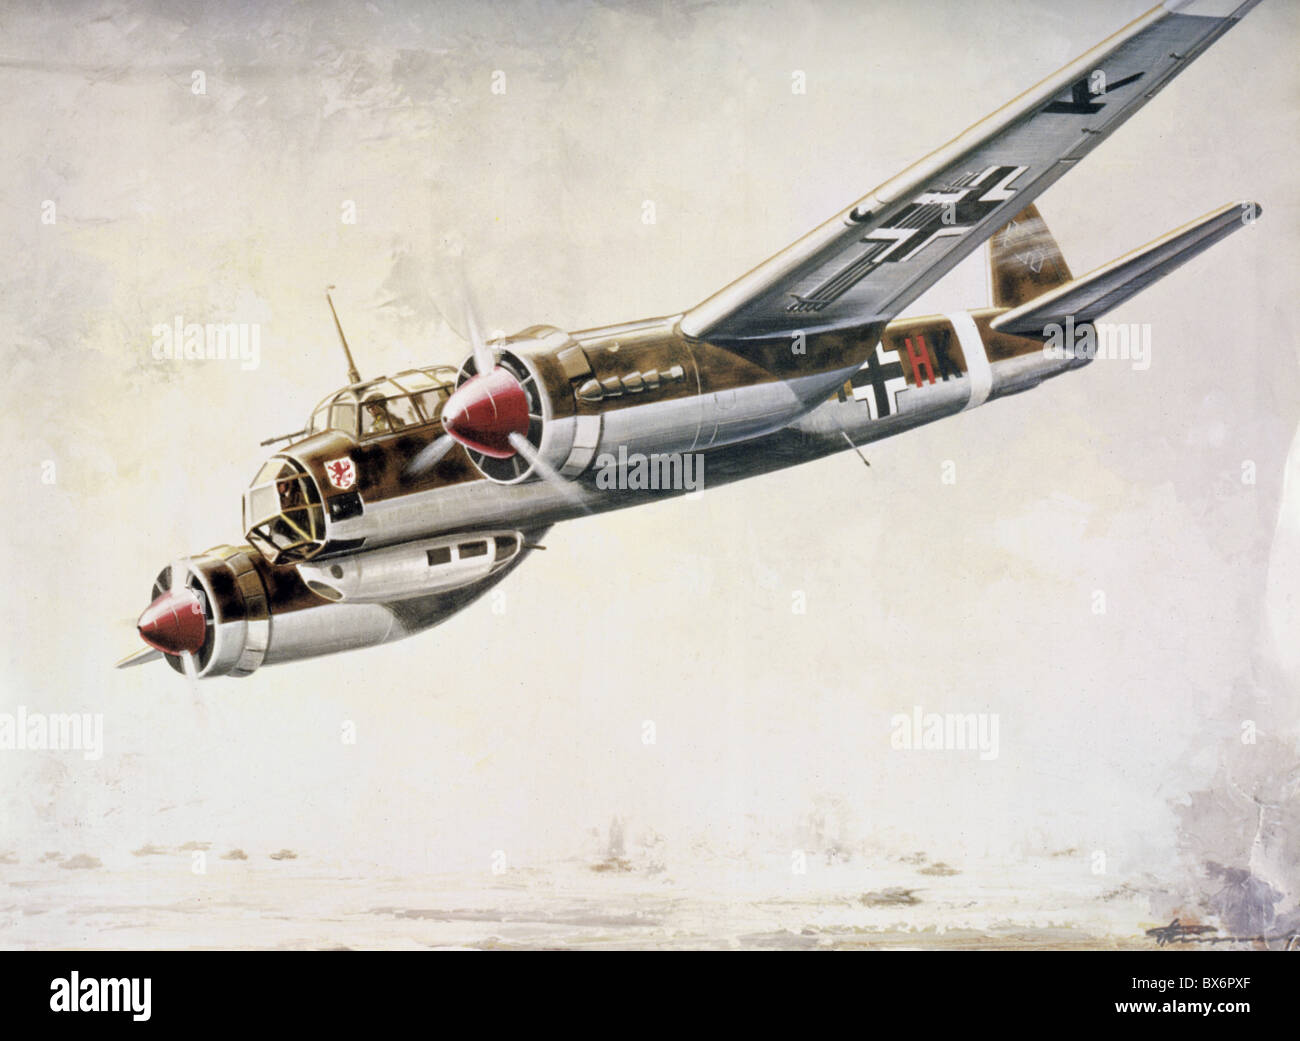 events, Second World War / WWII, aerial warfare, aircraft, German tactical bomber Junkers Ju 88 A-5, Lehrgeschwader 1 (LG 1), circa 1941, painting, Africa, bombers, Luftwaffe, plane, aircraft, planes, Wehrmacht, 20th century, historic, historical, Third Reich, 1940s, Additional-Rights-Clearences-Not Available Stock Photo